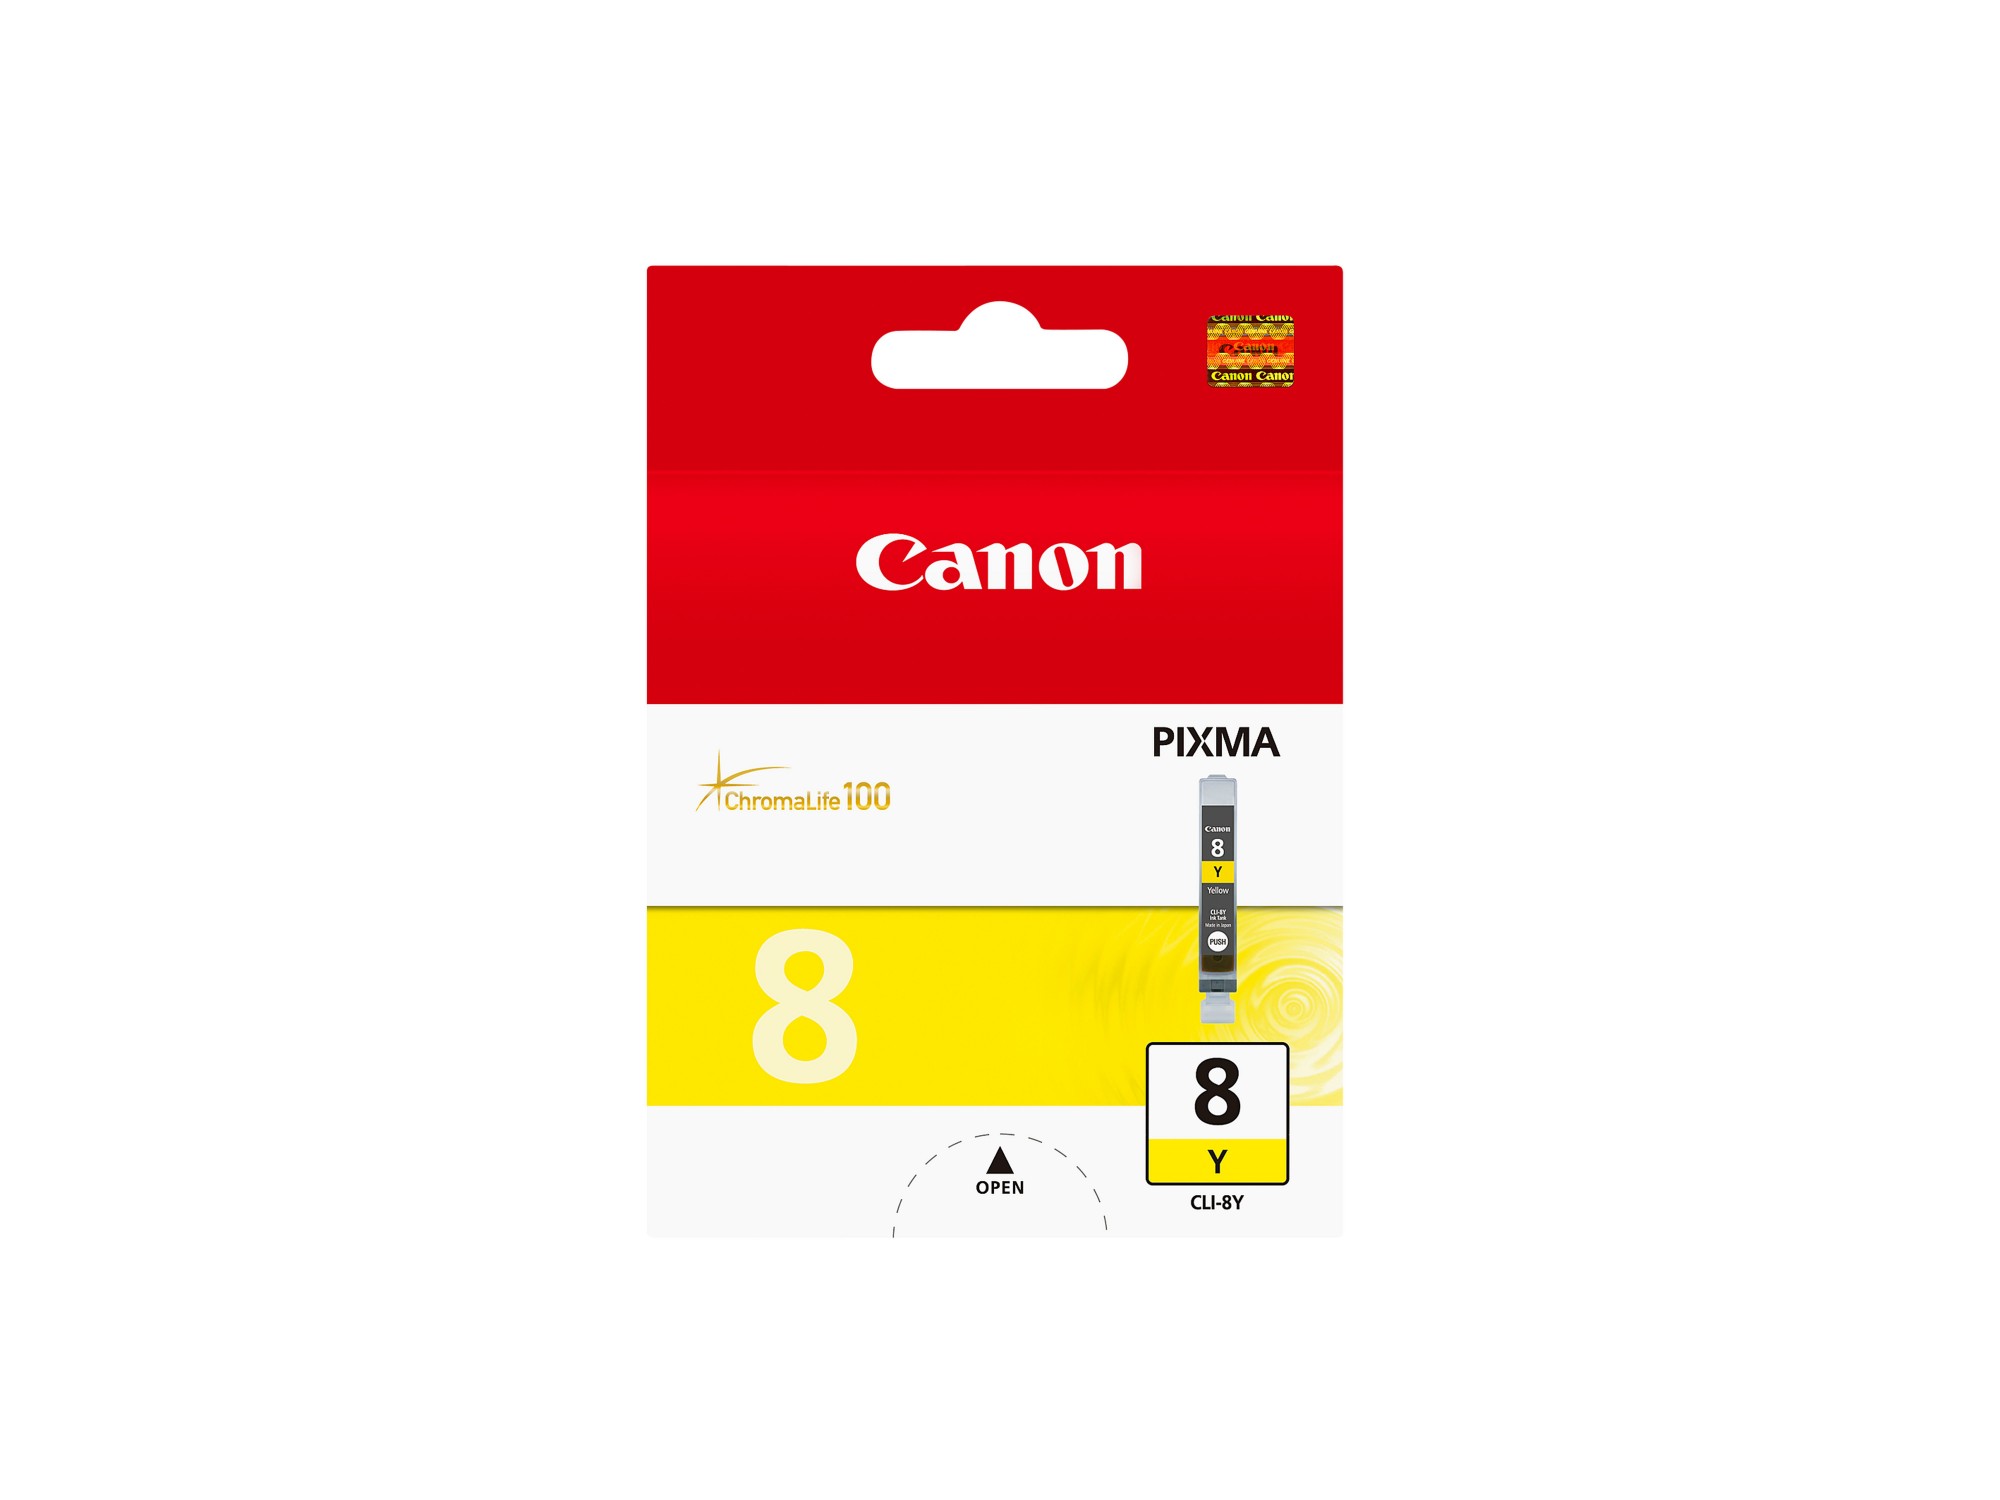 Canon 0623B001/CLI-8Y Ink cartridge yellow, 530 pages ISO/IEC 24711 13ml for Canon Pixma IP 3300/4200/6600/MP 960/Pro 9000